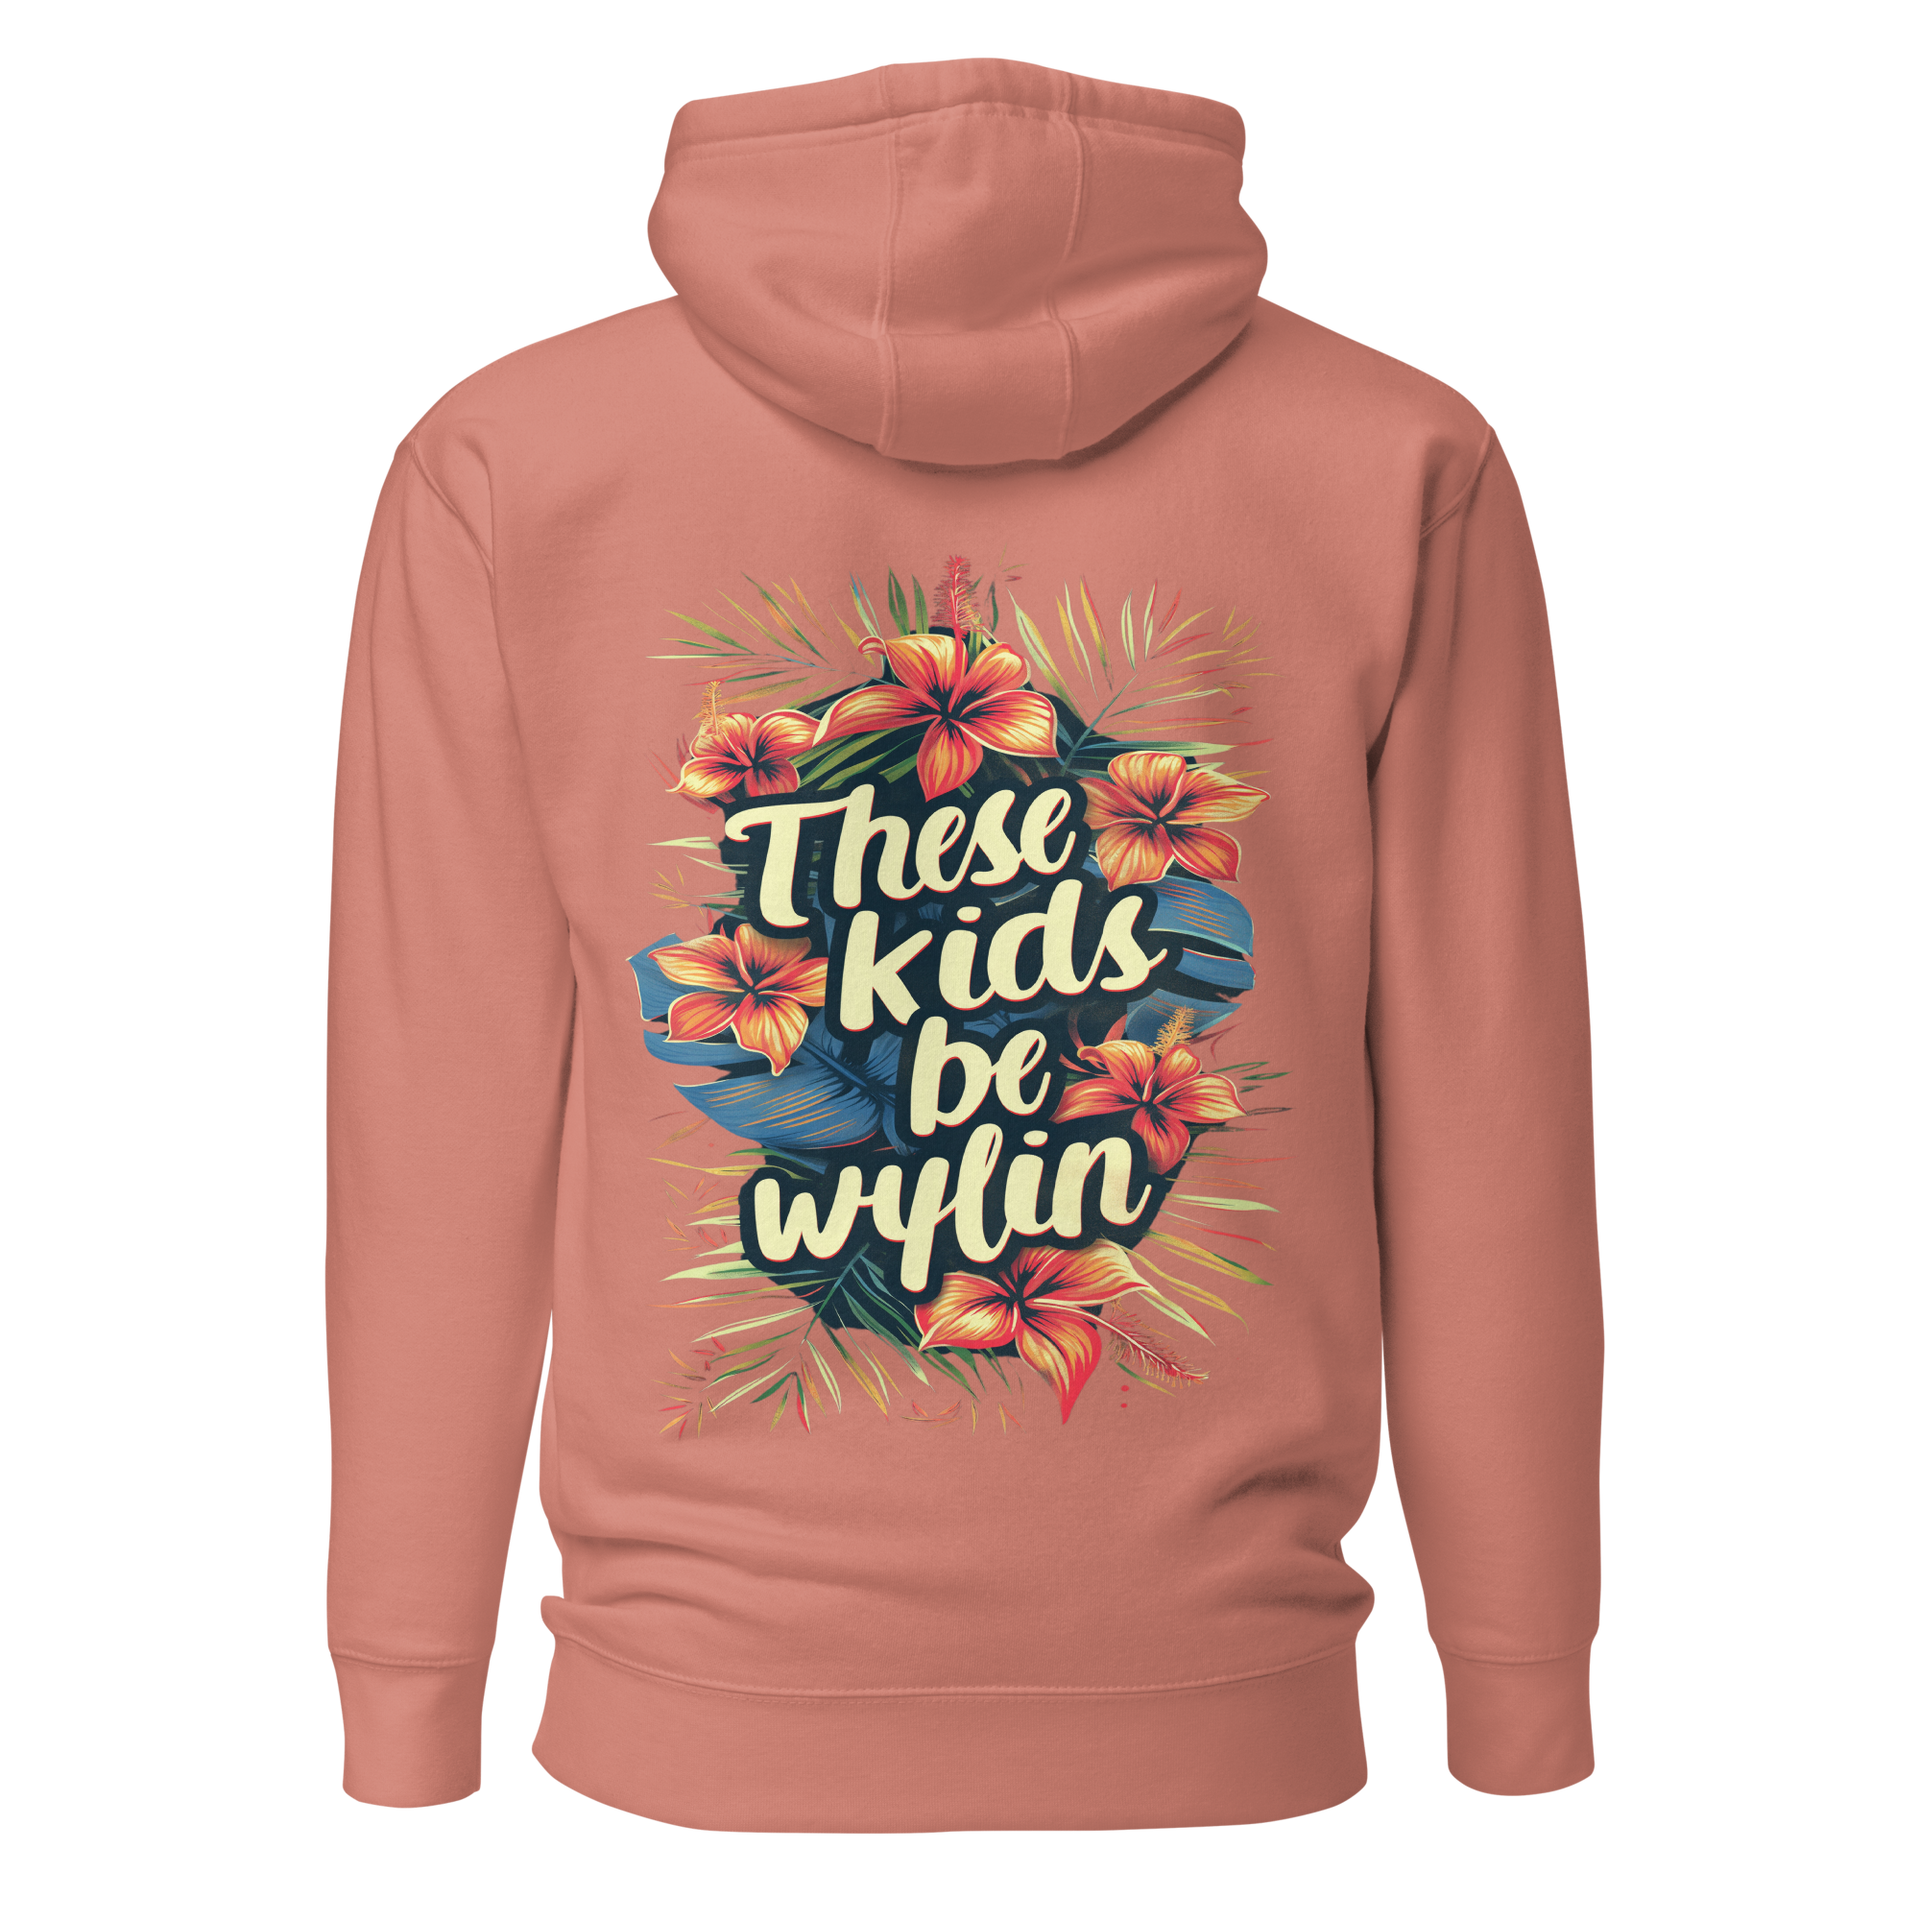 Blackstock | Limited Edition THESE KIDS BE WYLIN’ Unisex Hoodie